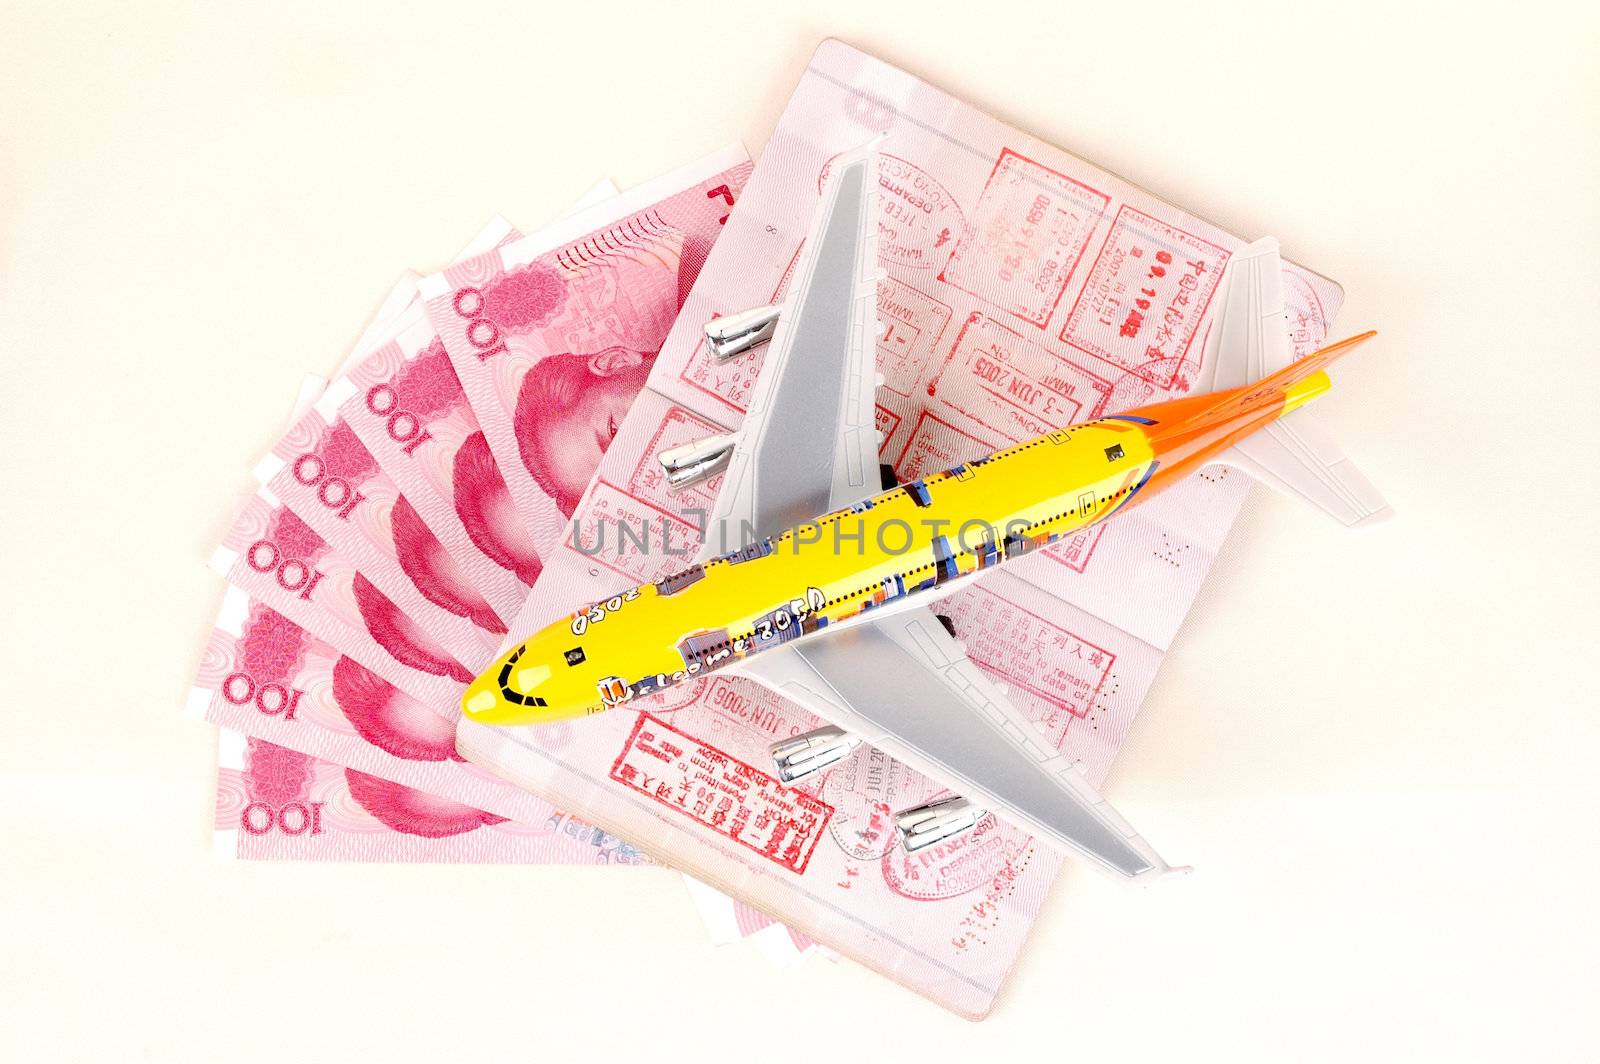 Small toy plane, passport full of stamps from Hongkong and Chinese money, RMB banknotes.